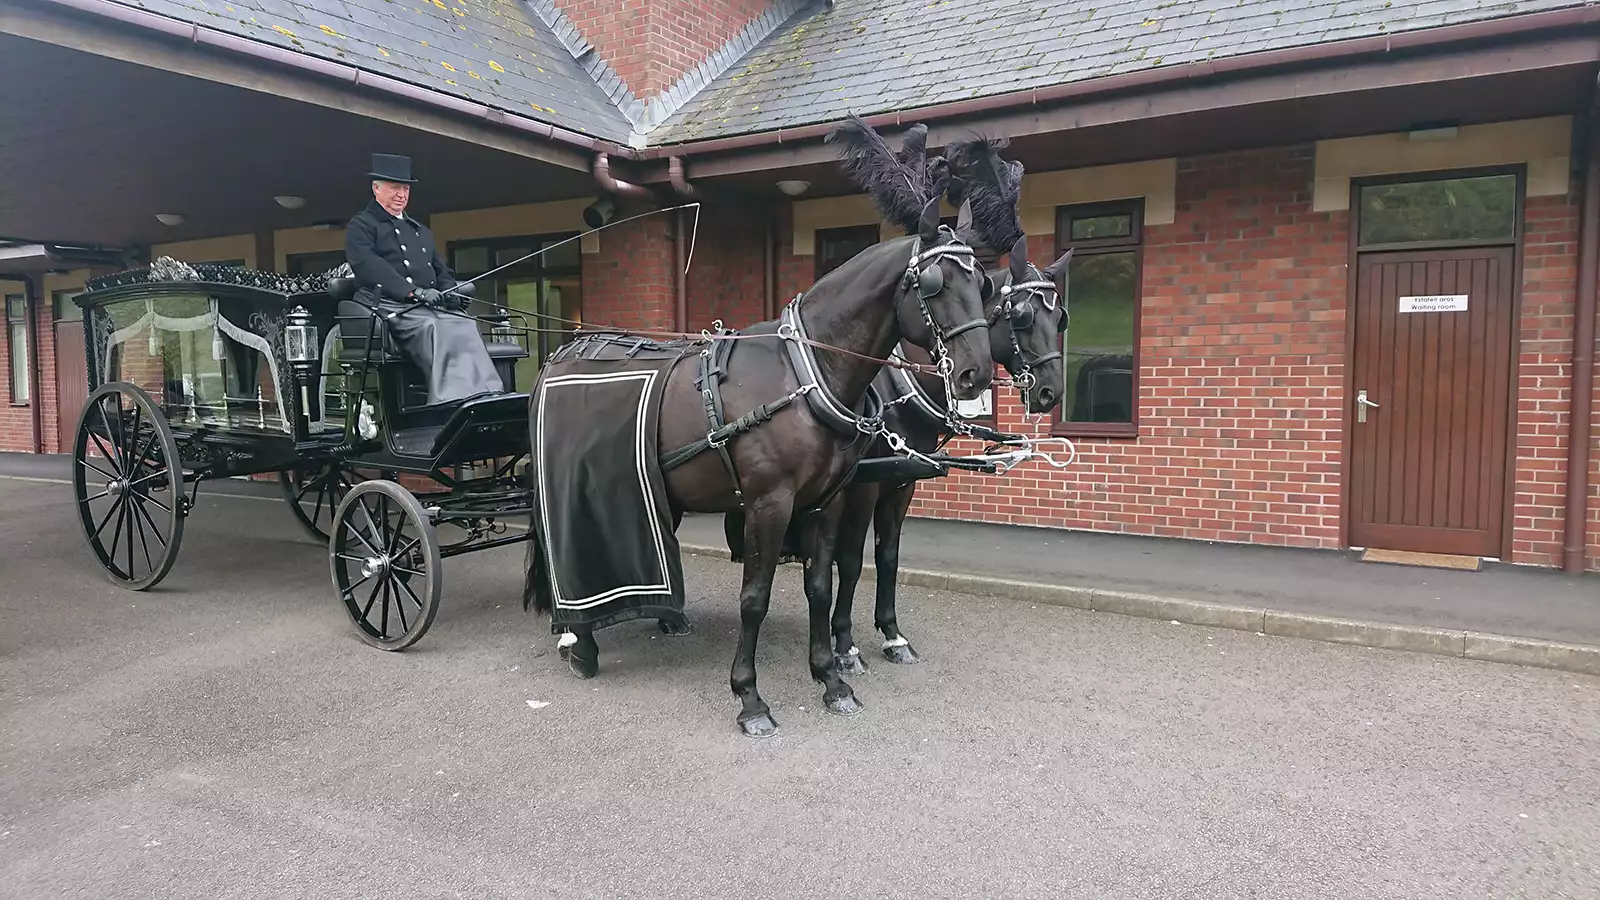 Horse drawn funeral carriage south wales 04